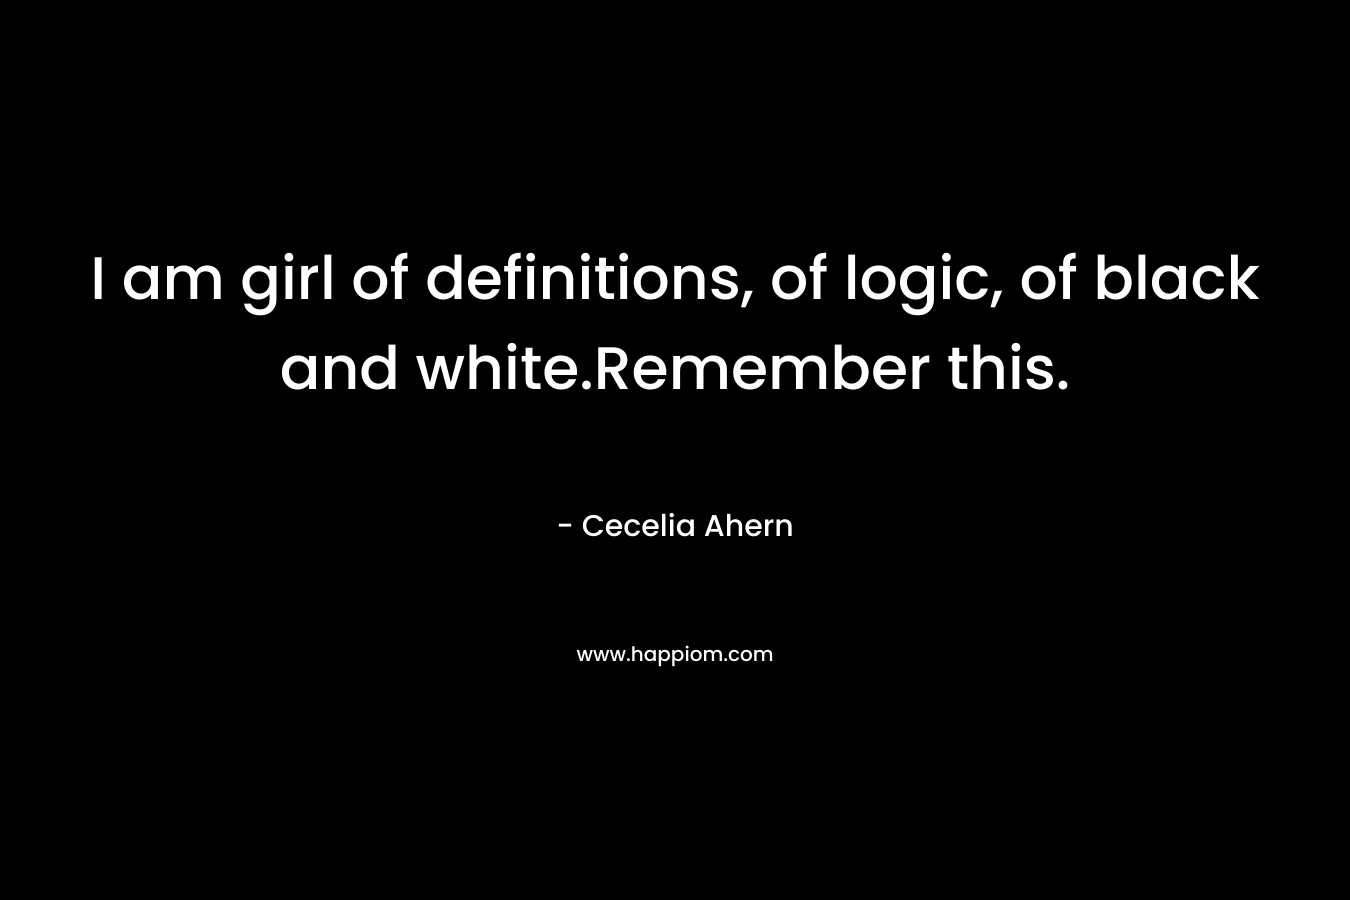 I am girl of definitions, of logic, of black and white.Remember this. – Cecelia Ahern